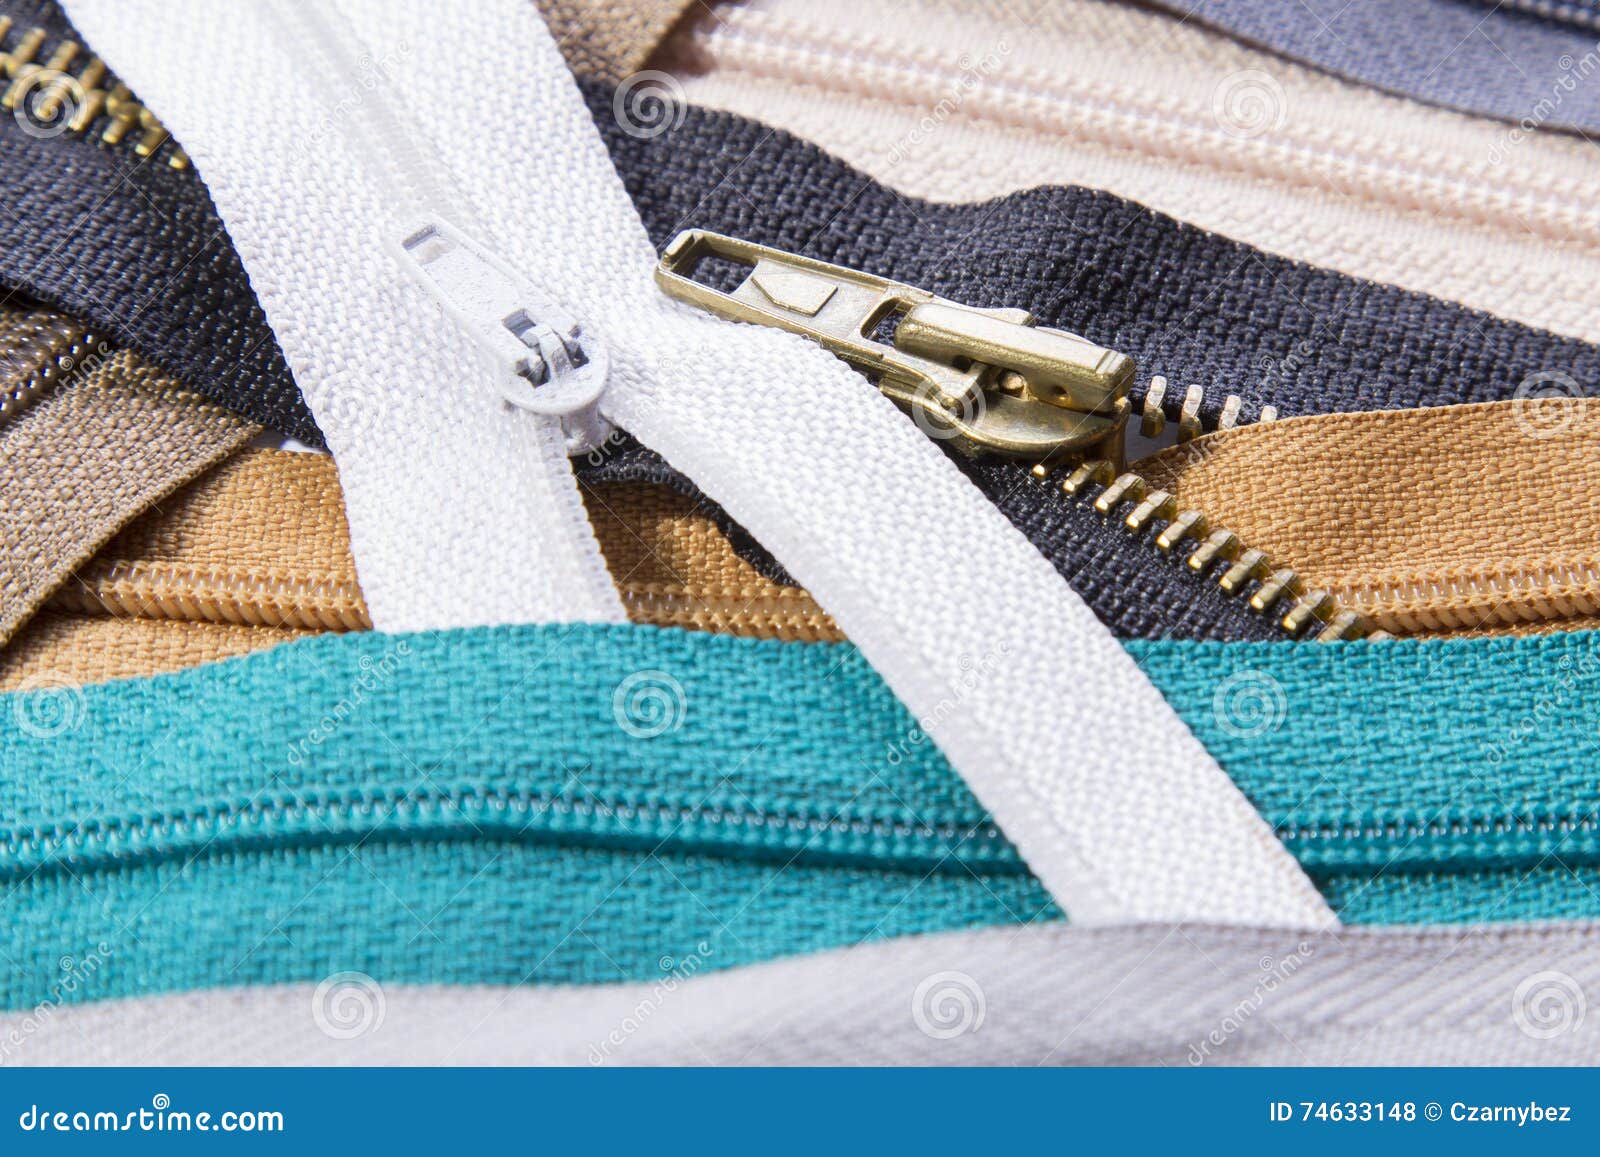 Colorful zippers stock photo. Image of celebration, message - 74633148